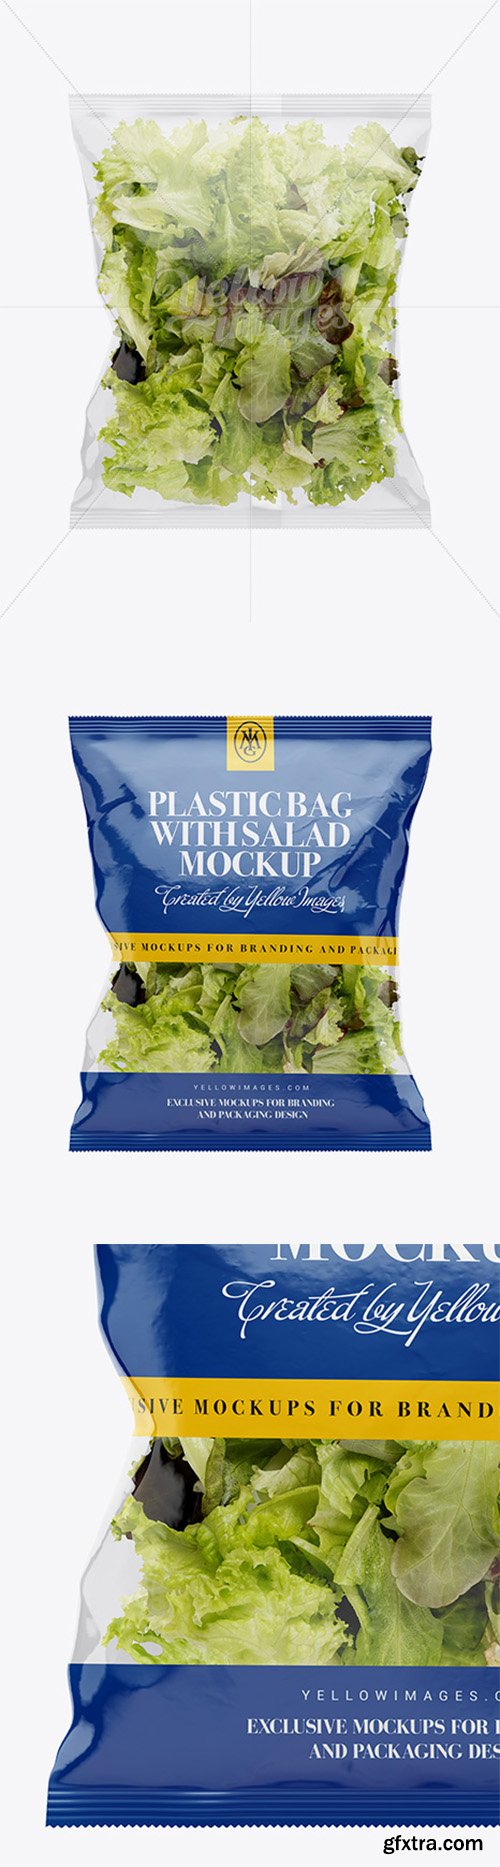 Clear Plastic Bag With Salad Mockup 15768 Gfxtra